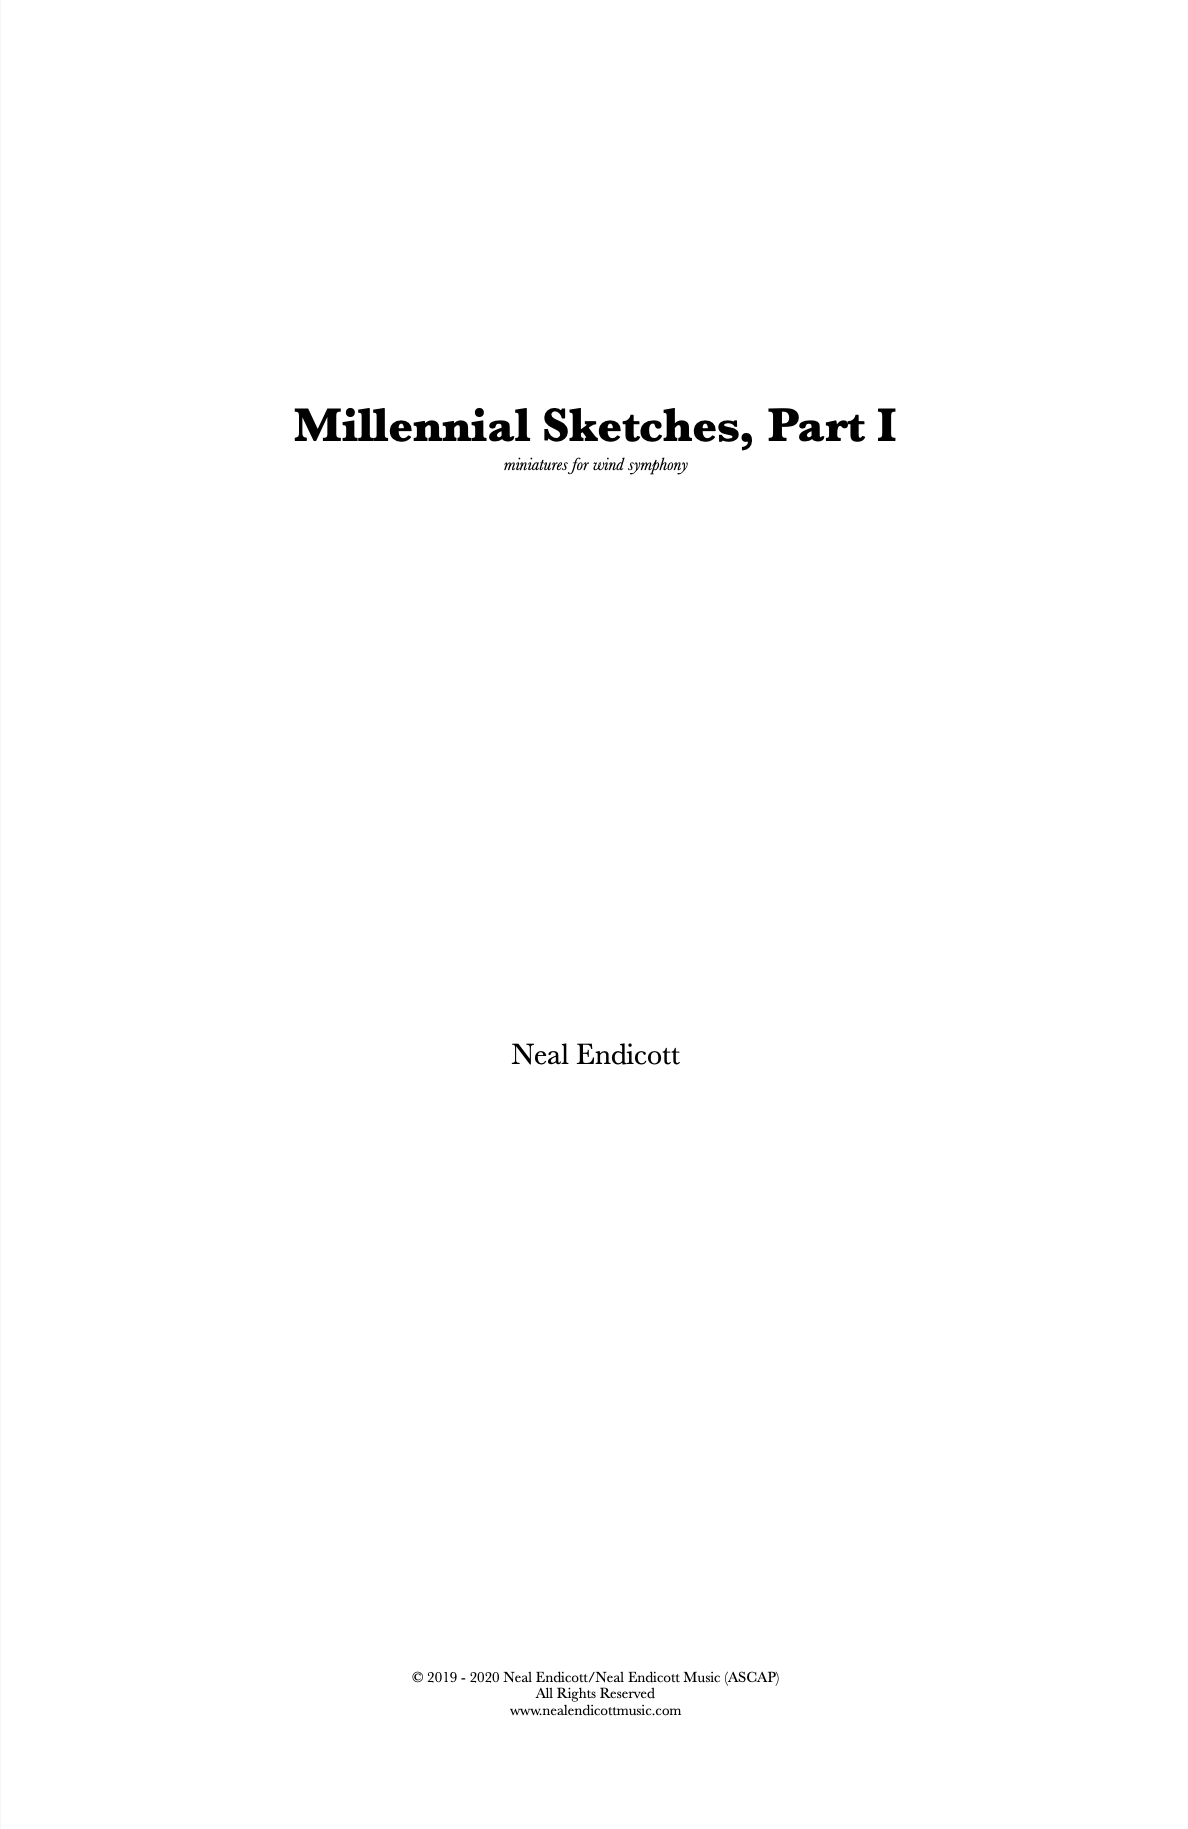 Millennial Sketches, Part 1 (Score Only) by Neal Endicott